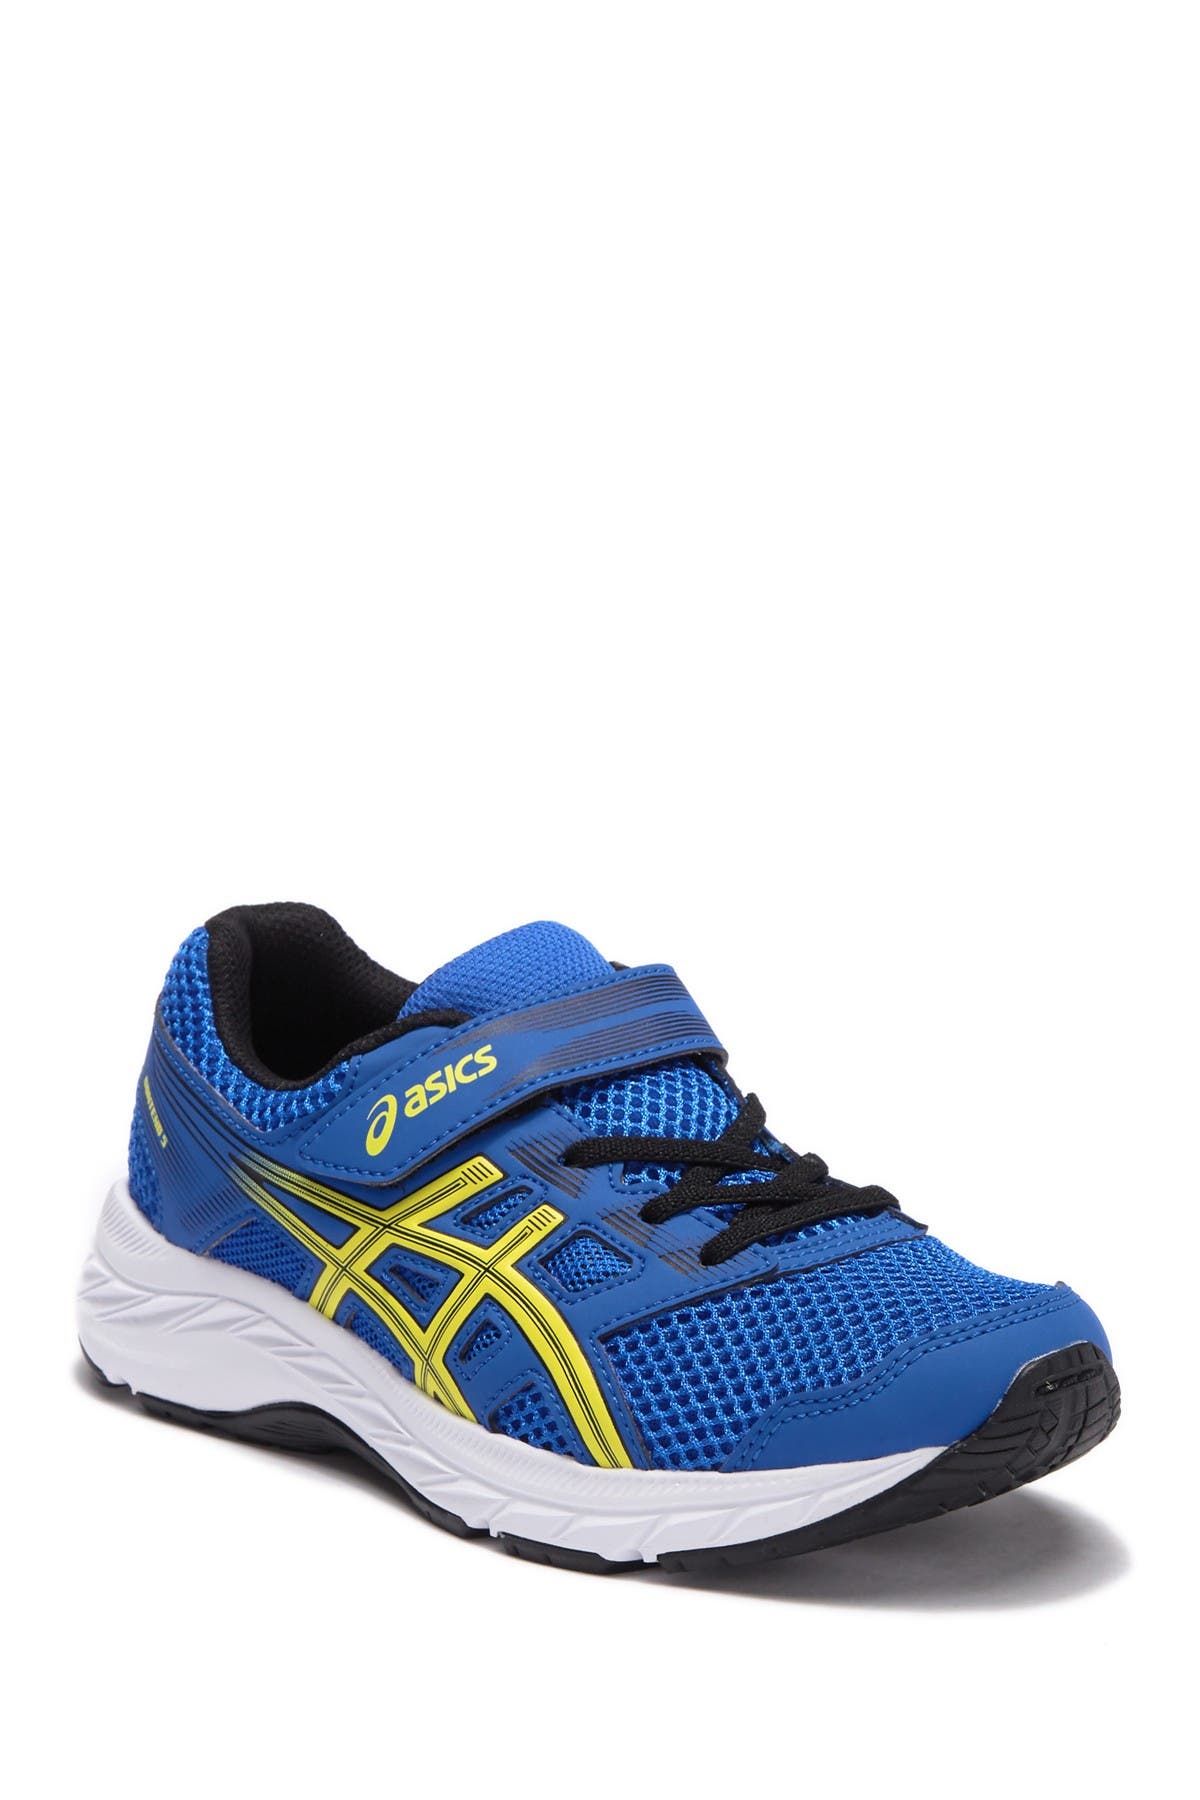 contend 5 ps asics